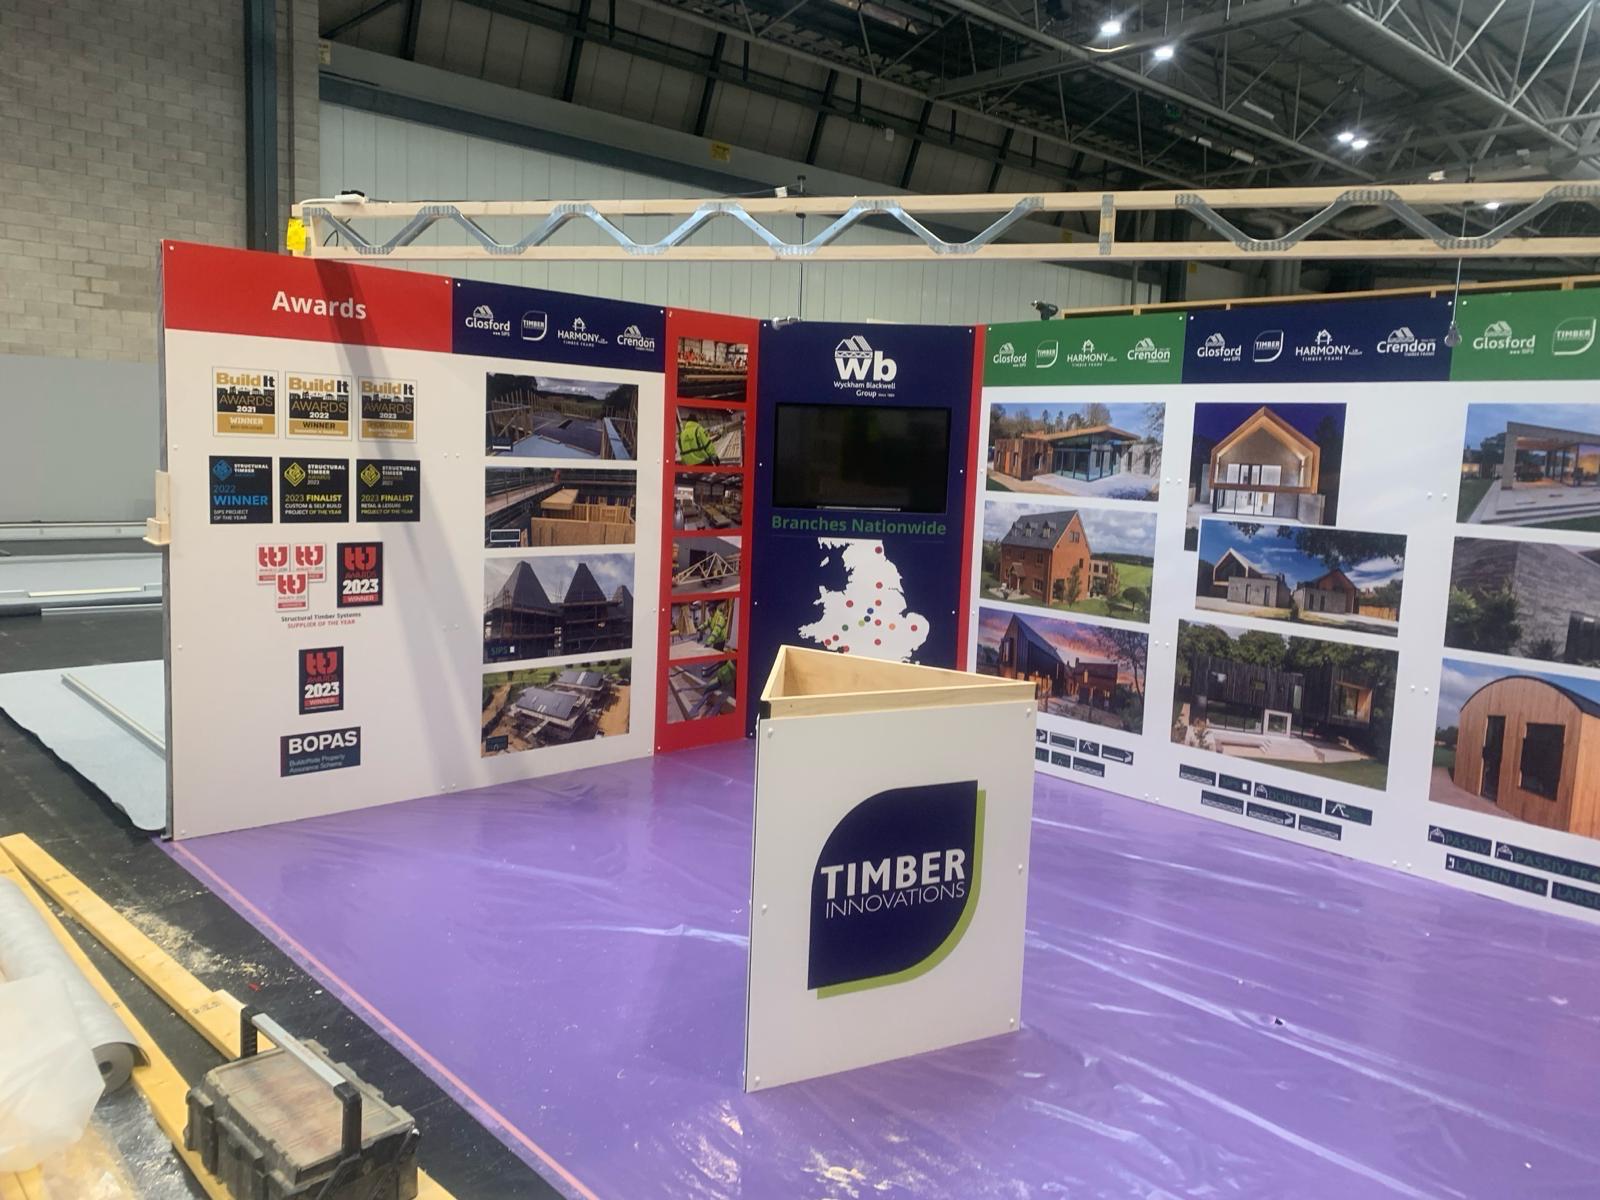 Timber Innovations branded stand being set up for an exhibition event